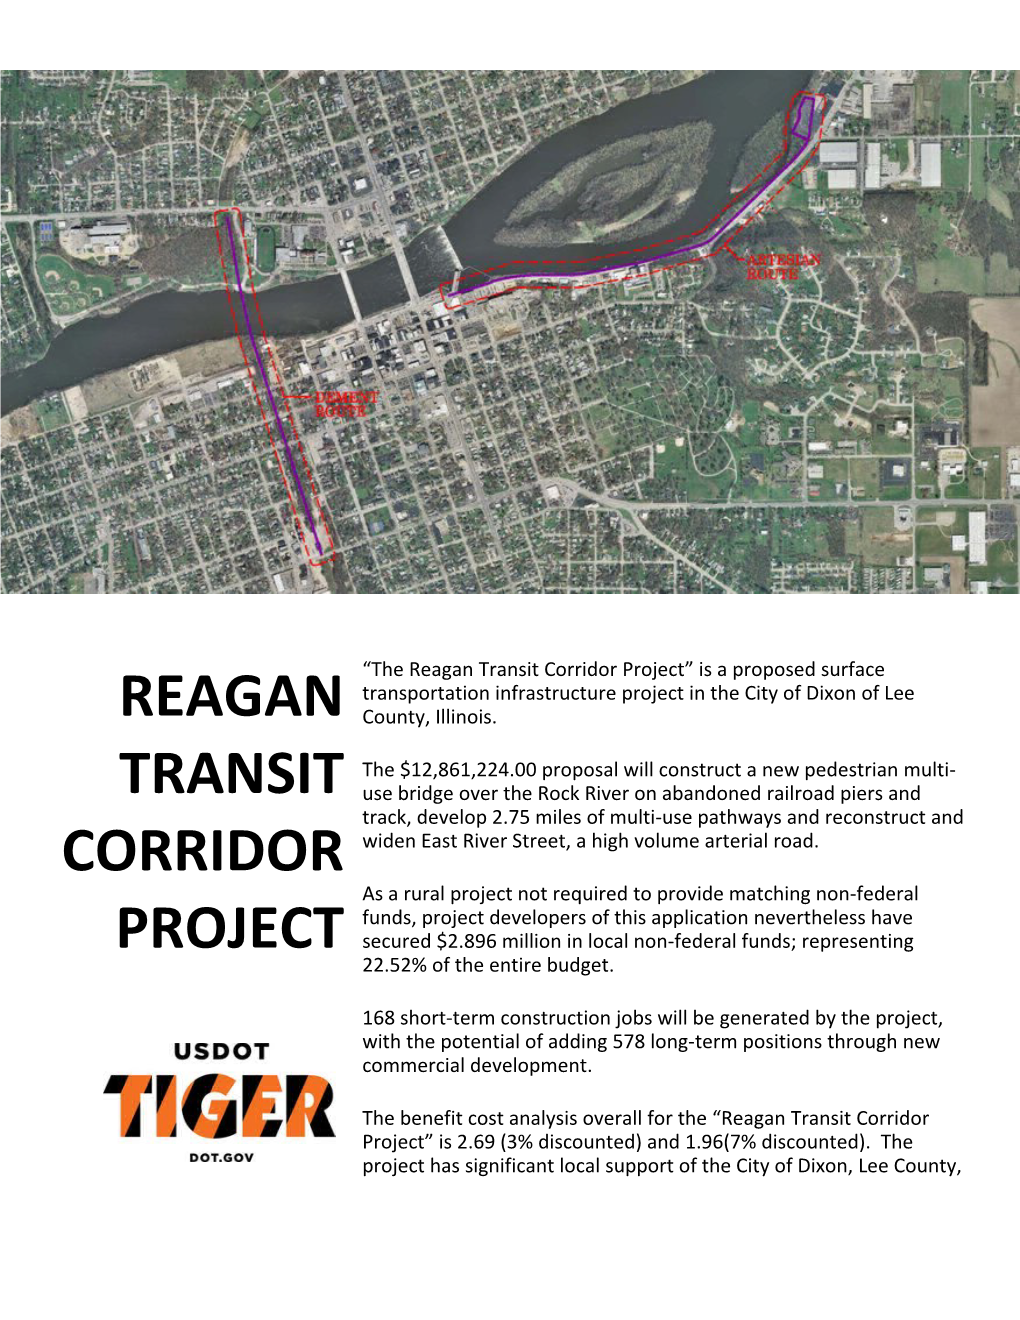 Reagan Transit Corridor Project” Is a Proposed Surface Transportation Infrastructure Project in the City of Dixon of Lee REAGAN County, Illinois